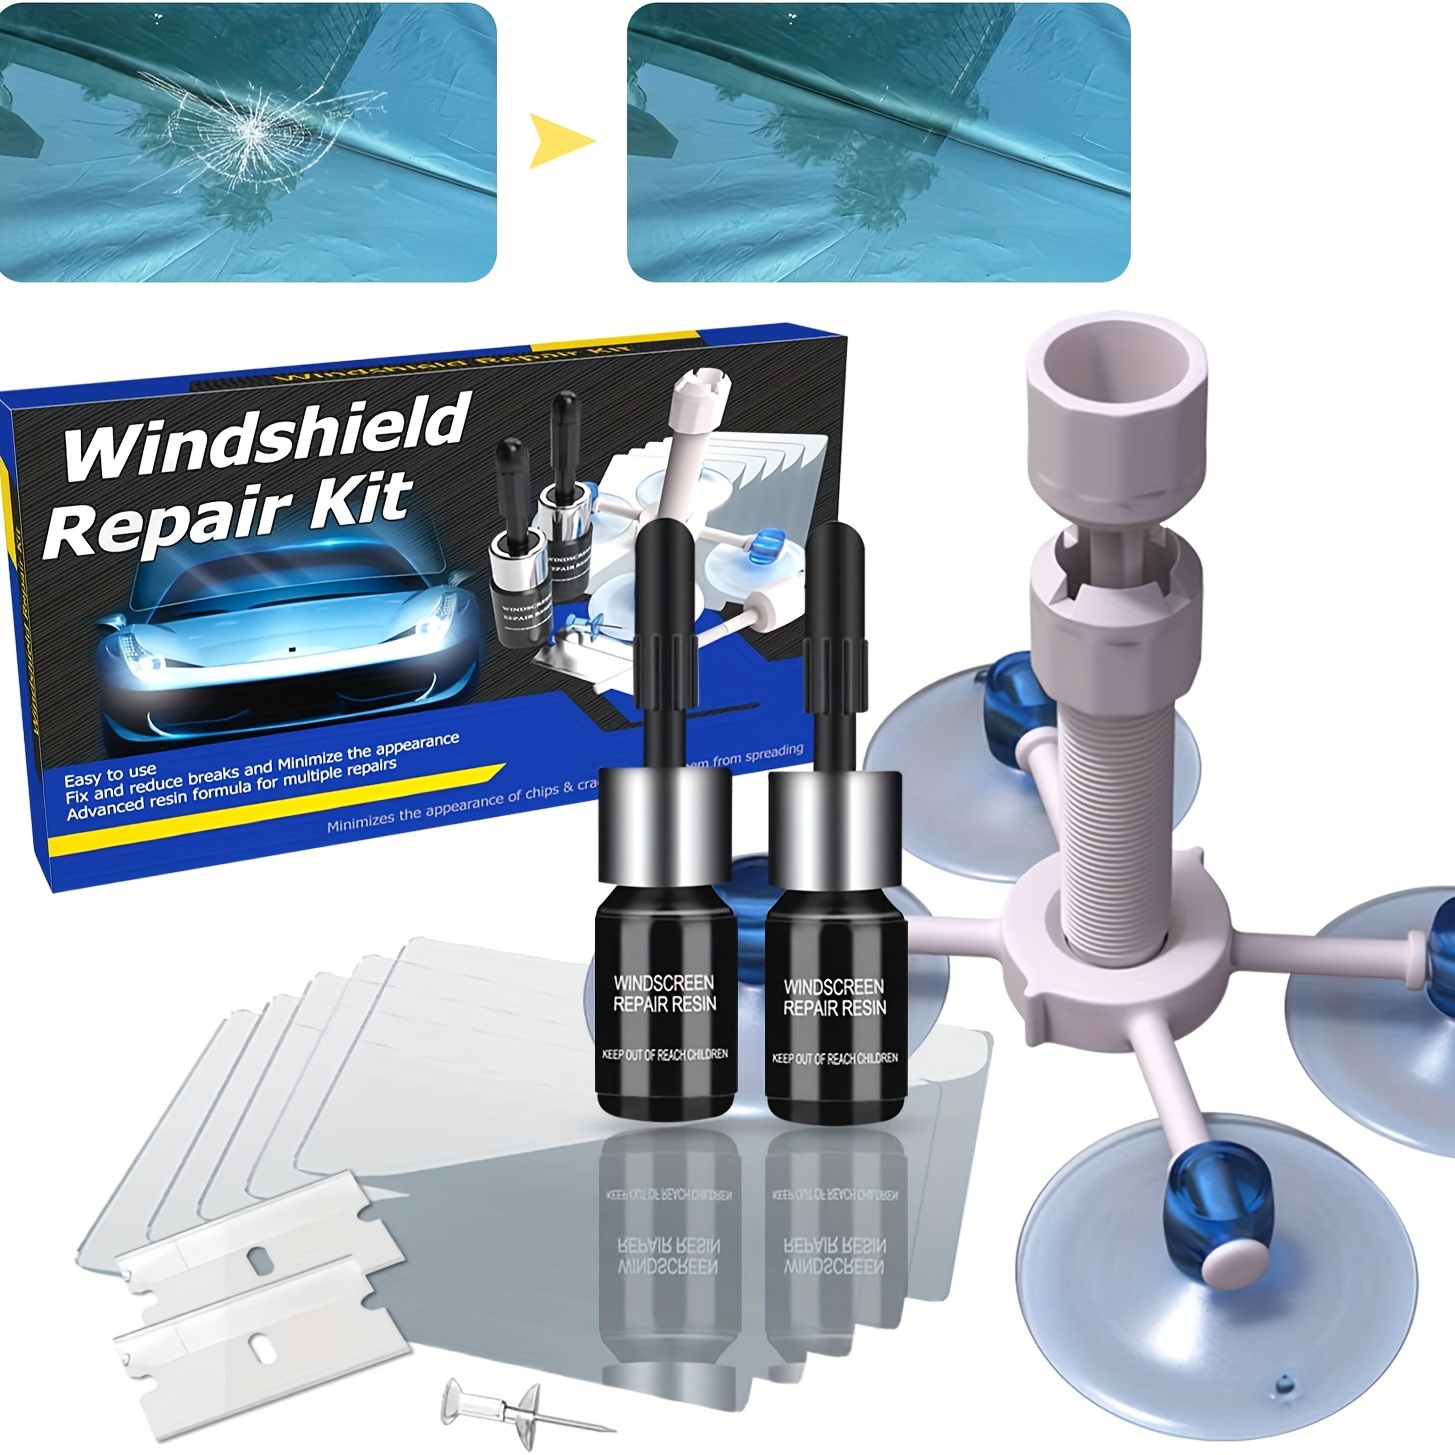 

Windshield Repair Kit, Windshield Crack Repair Kit, Automotive Glass Repair Kit With 2 Bottles Of Resin, Windshield Repair Fluid Quick Fix For Chips, Star-shaped, -eye